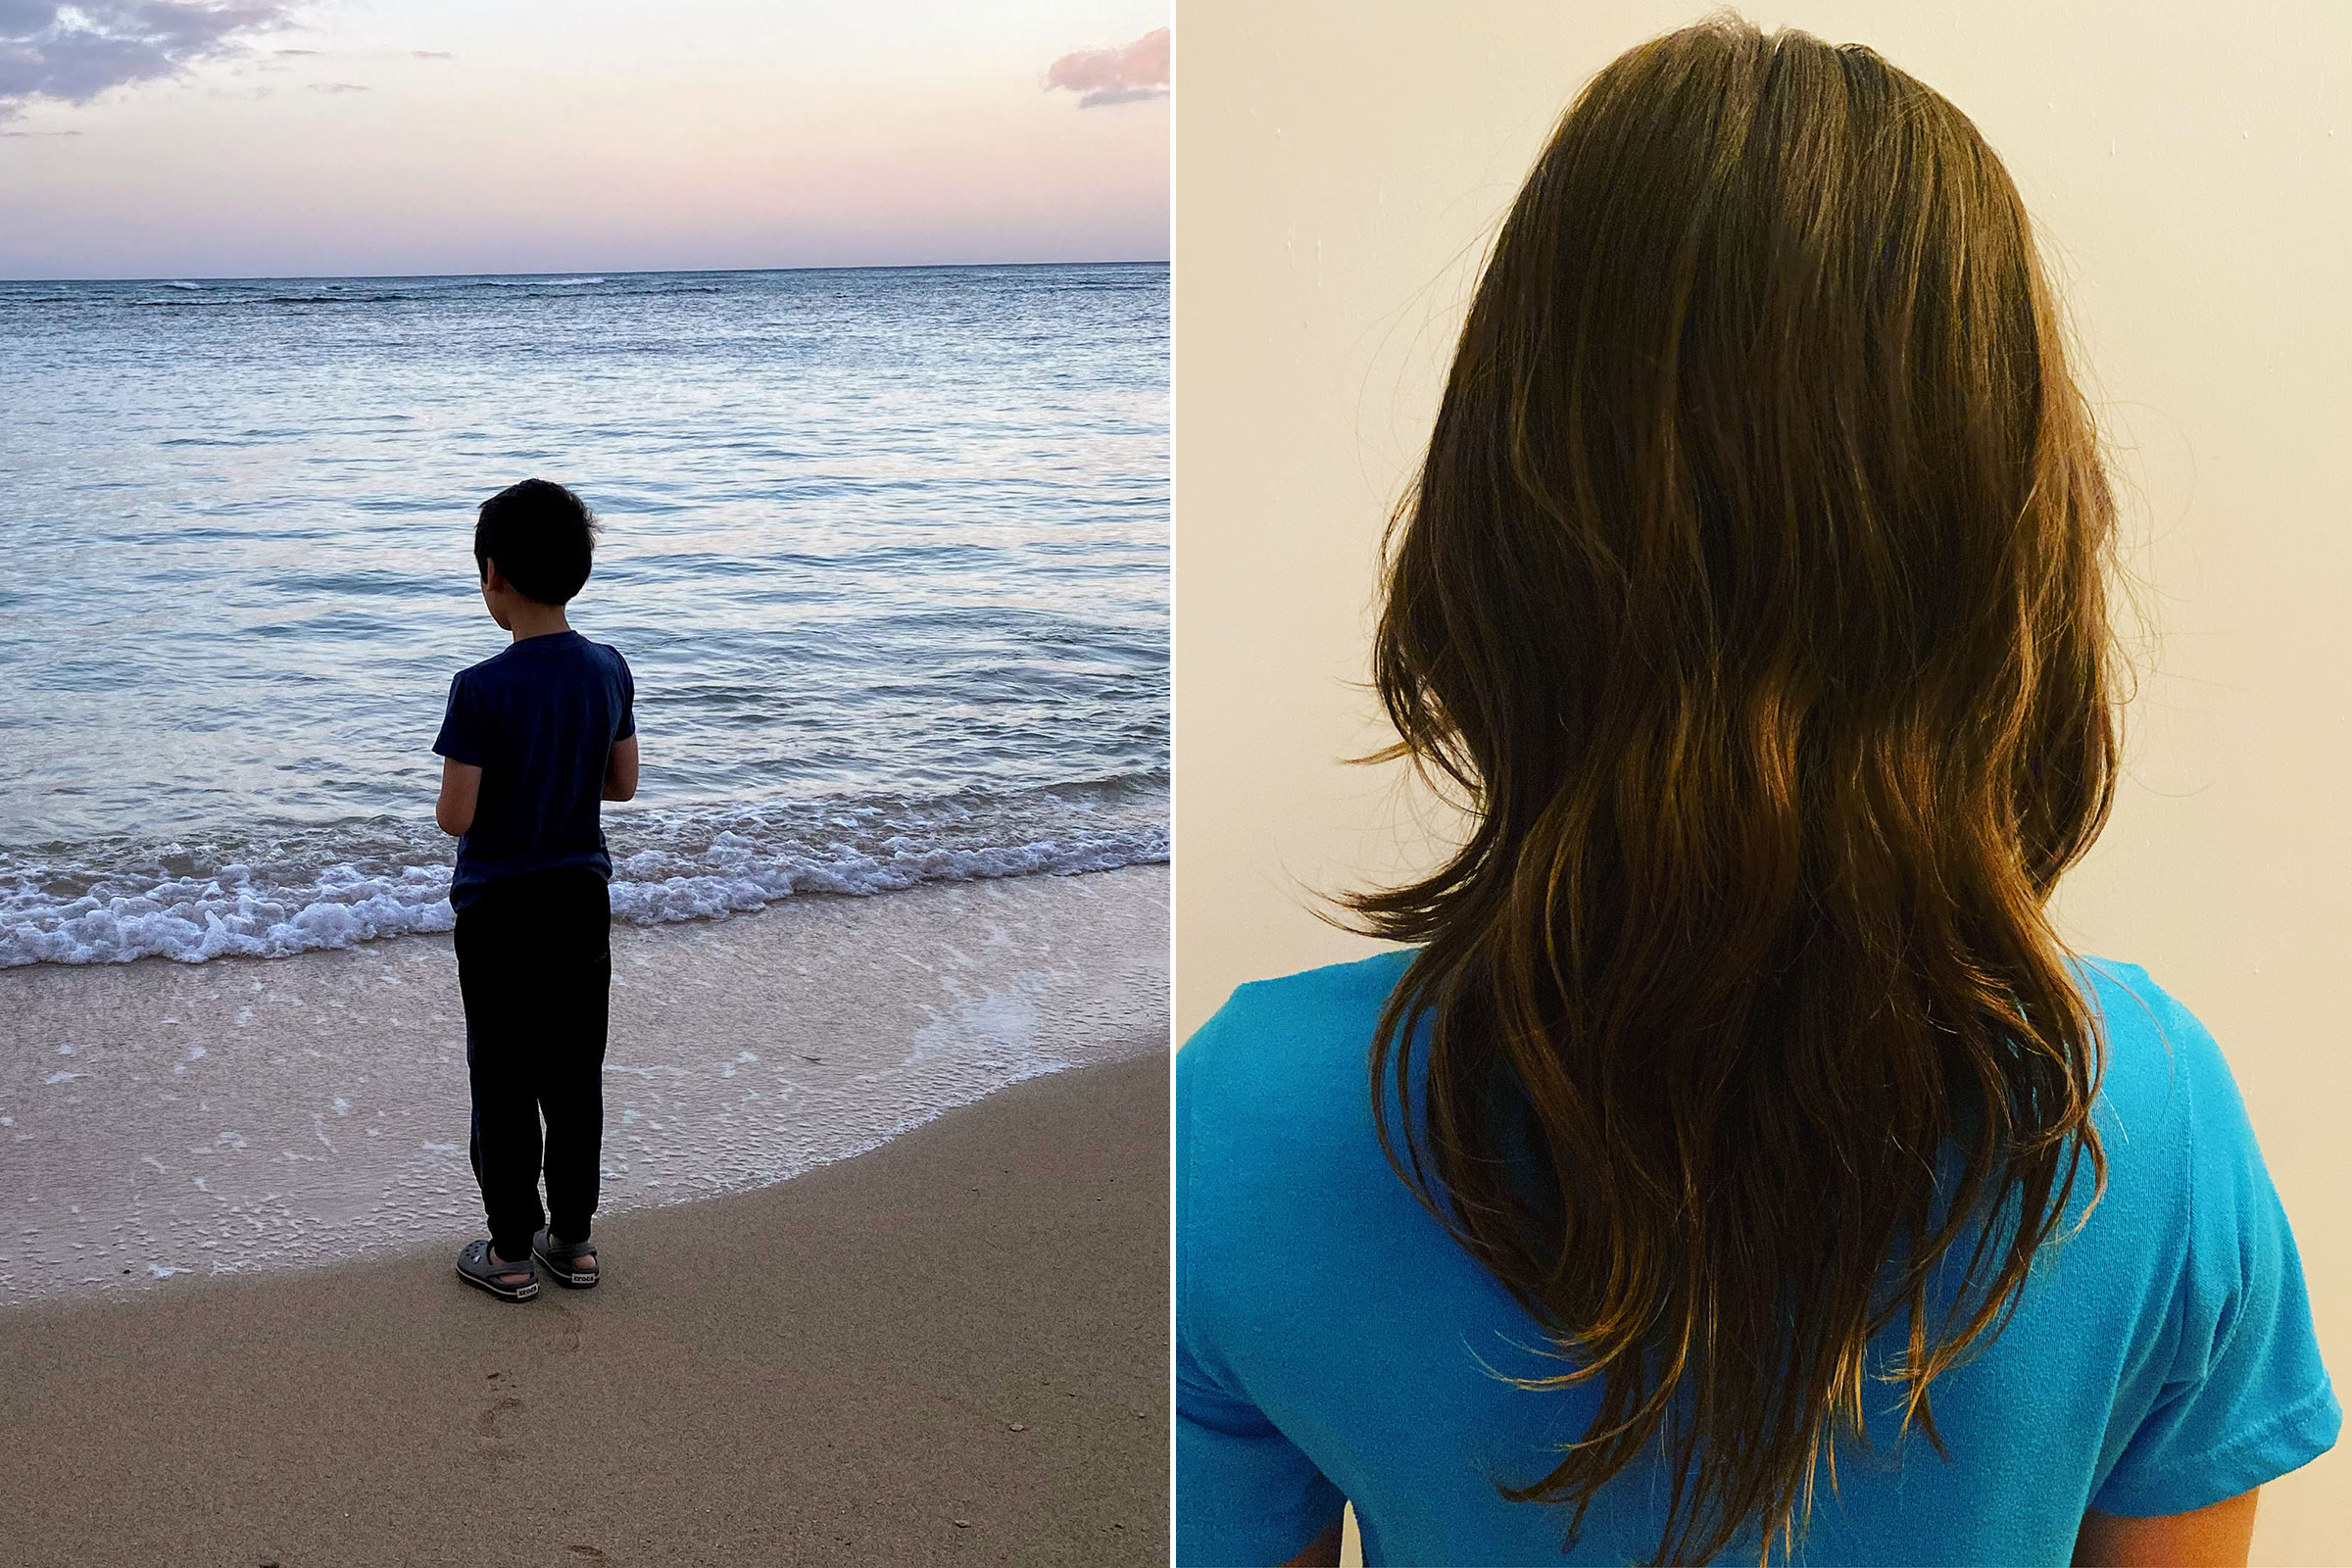 The author's son in February 2020, left, and in October 2021, right. (Courtesy Vanessa Hua)